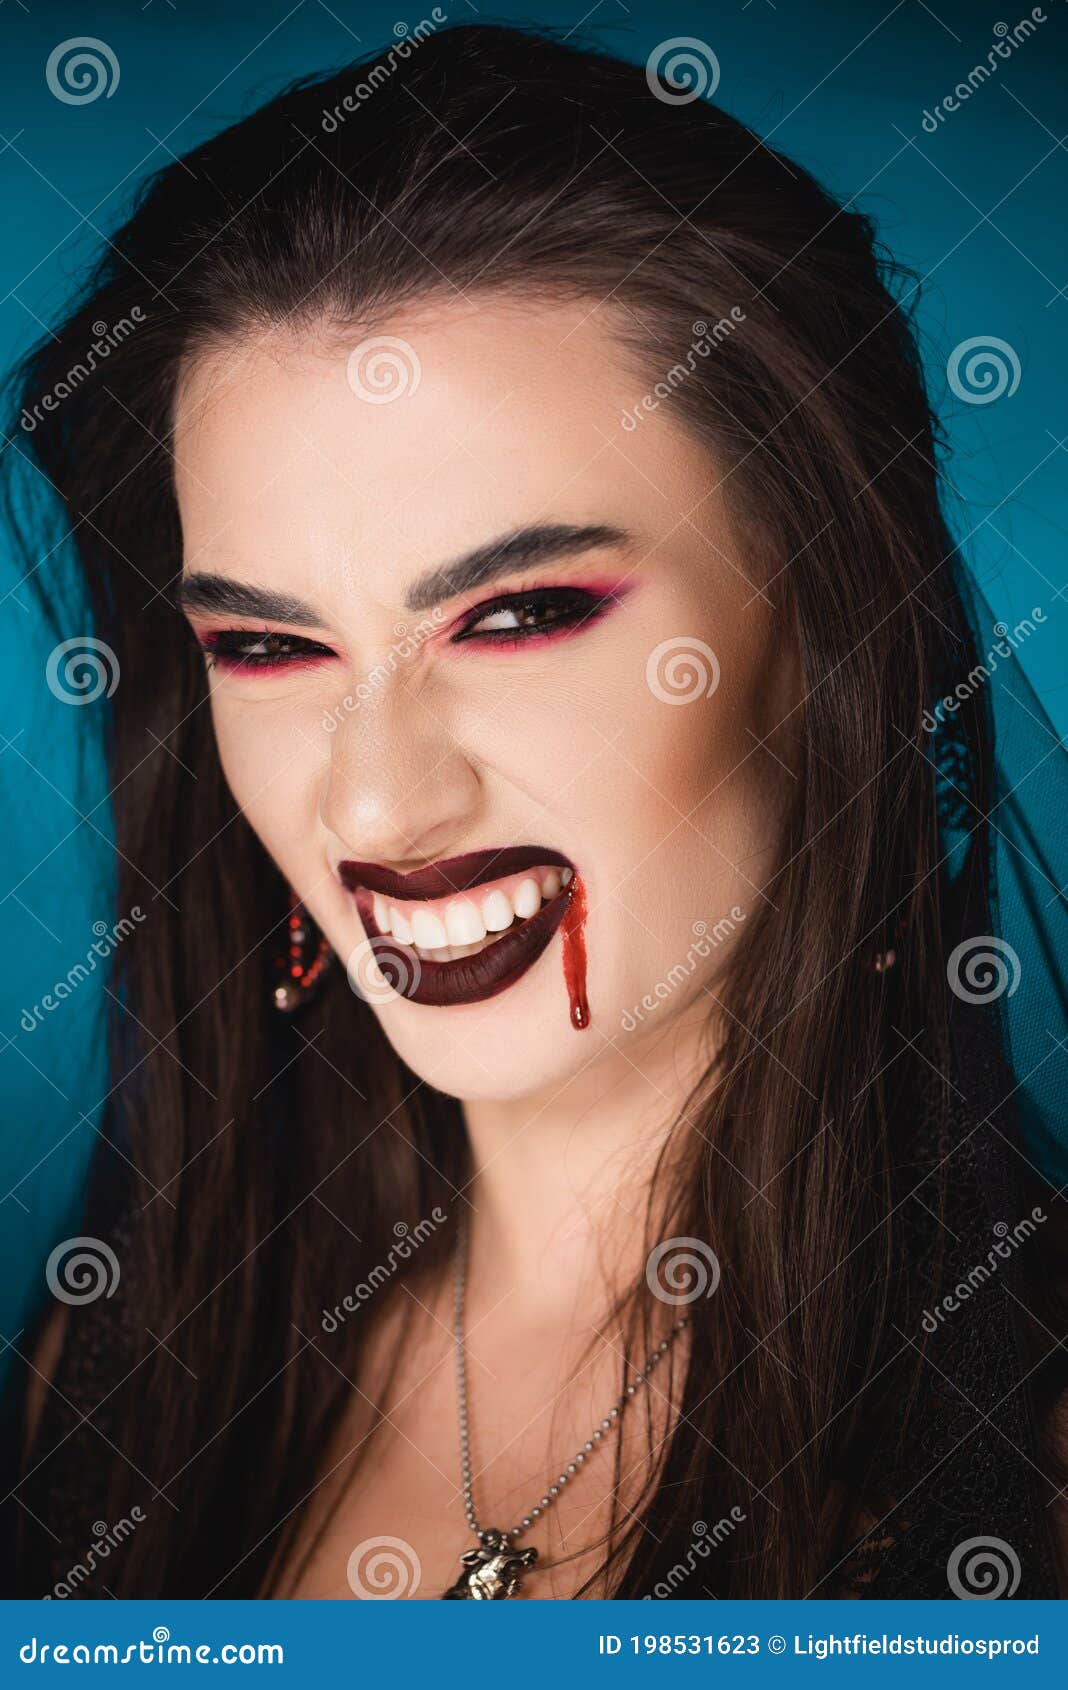 Woman with Blood on Face Showing Stock Image - Image of caucasian, blue ...